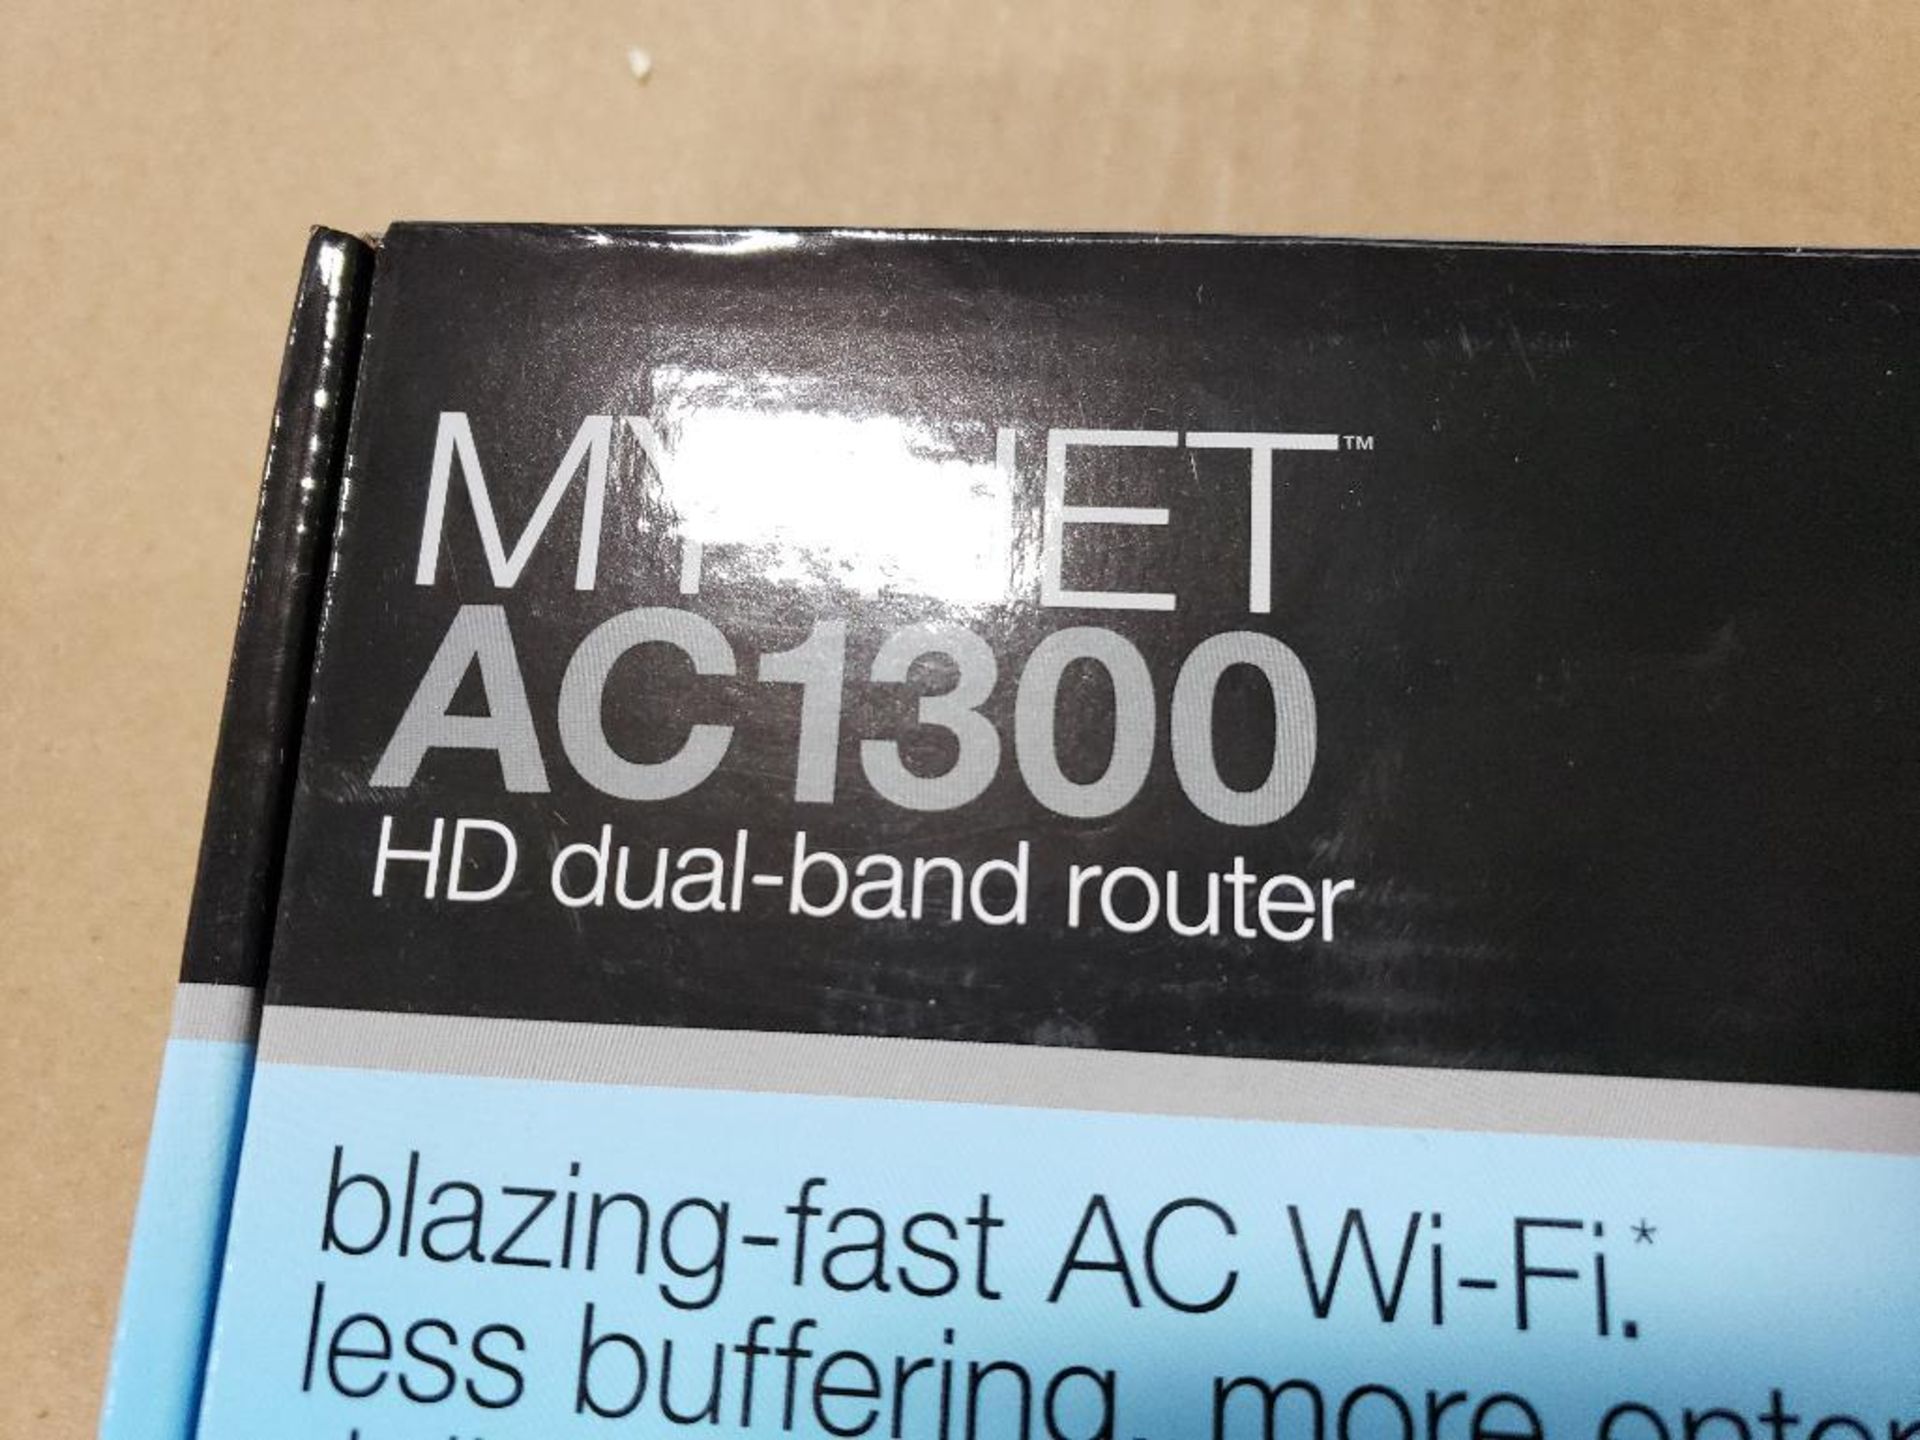 WD My Net AC1300 dual-band HD router. - Image 2 of 9